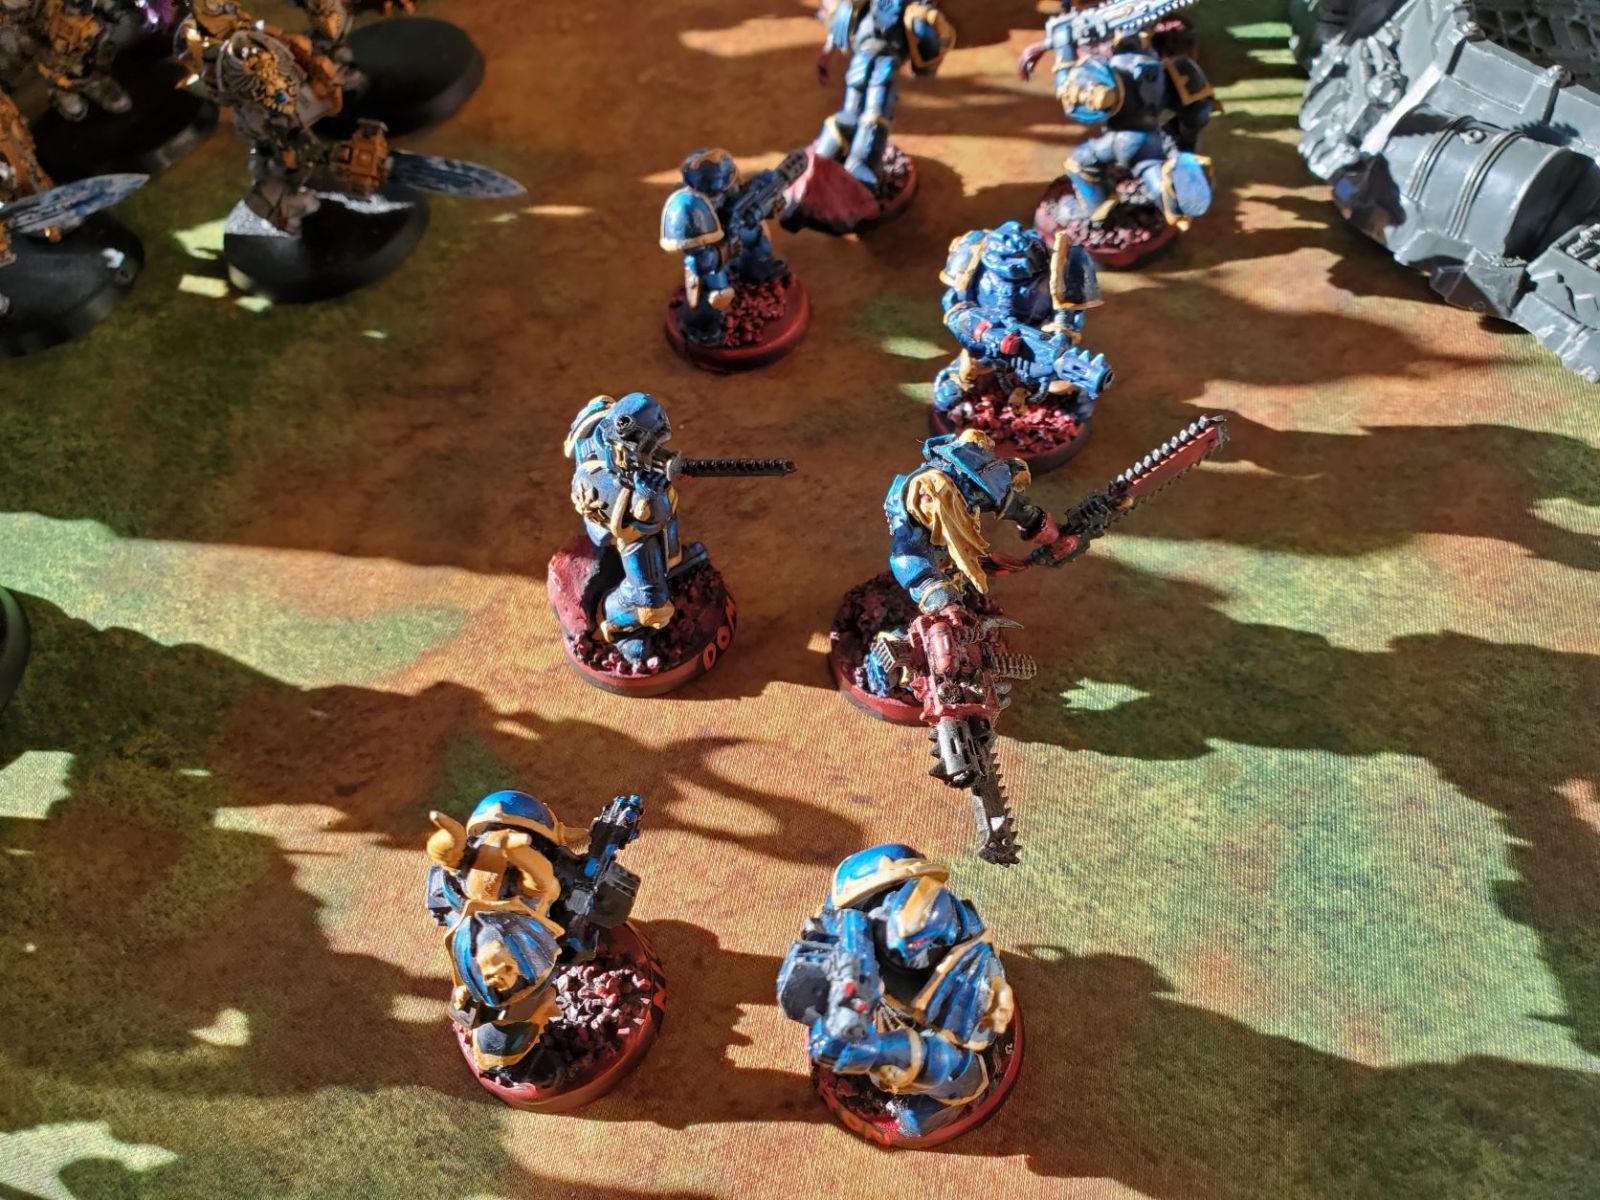 5. Chaos Marines before Battle